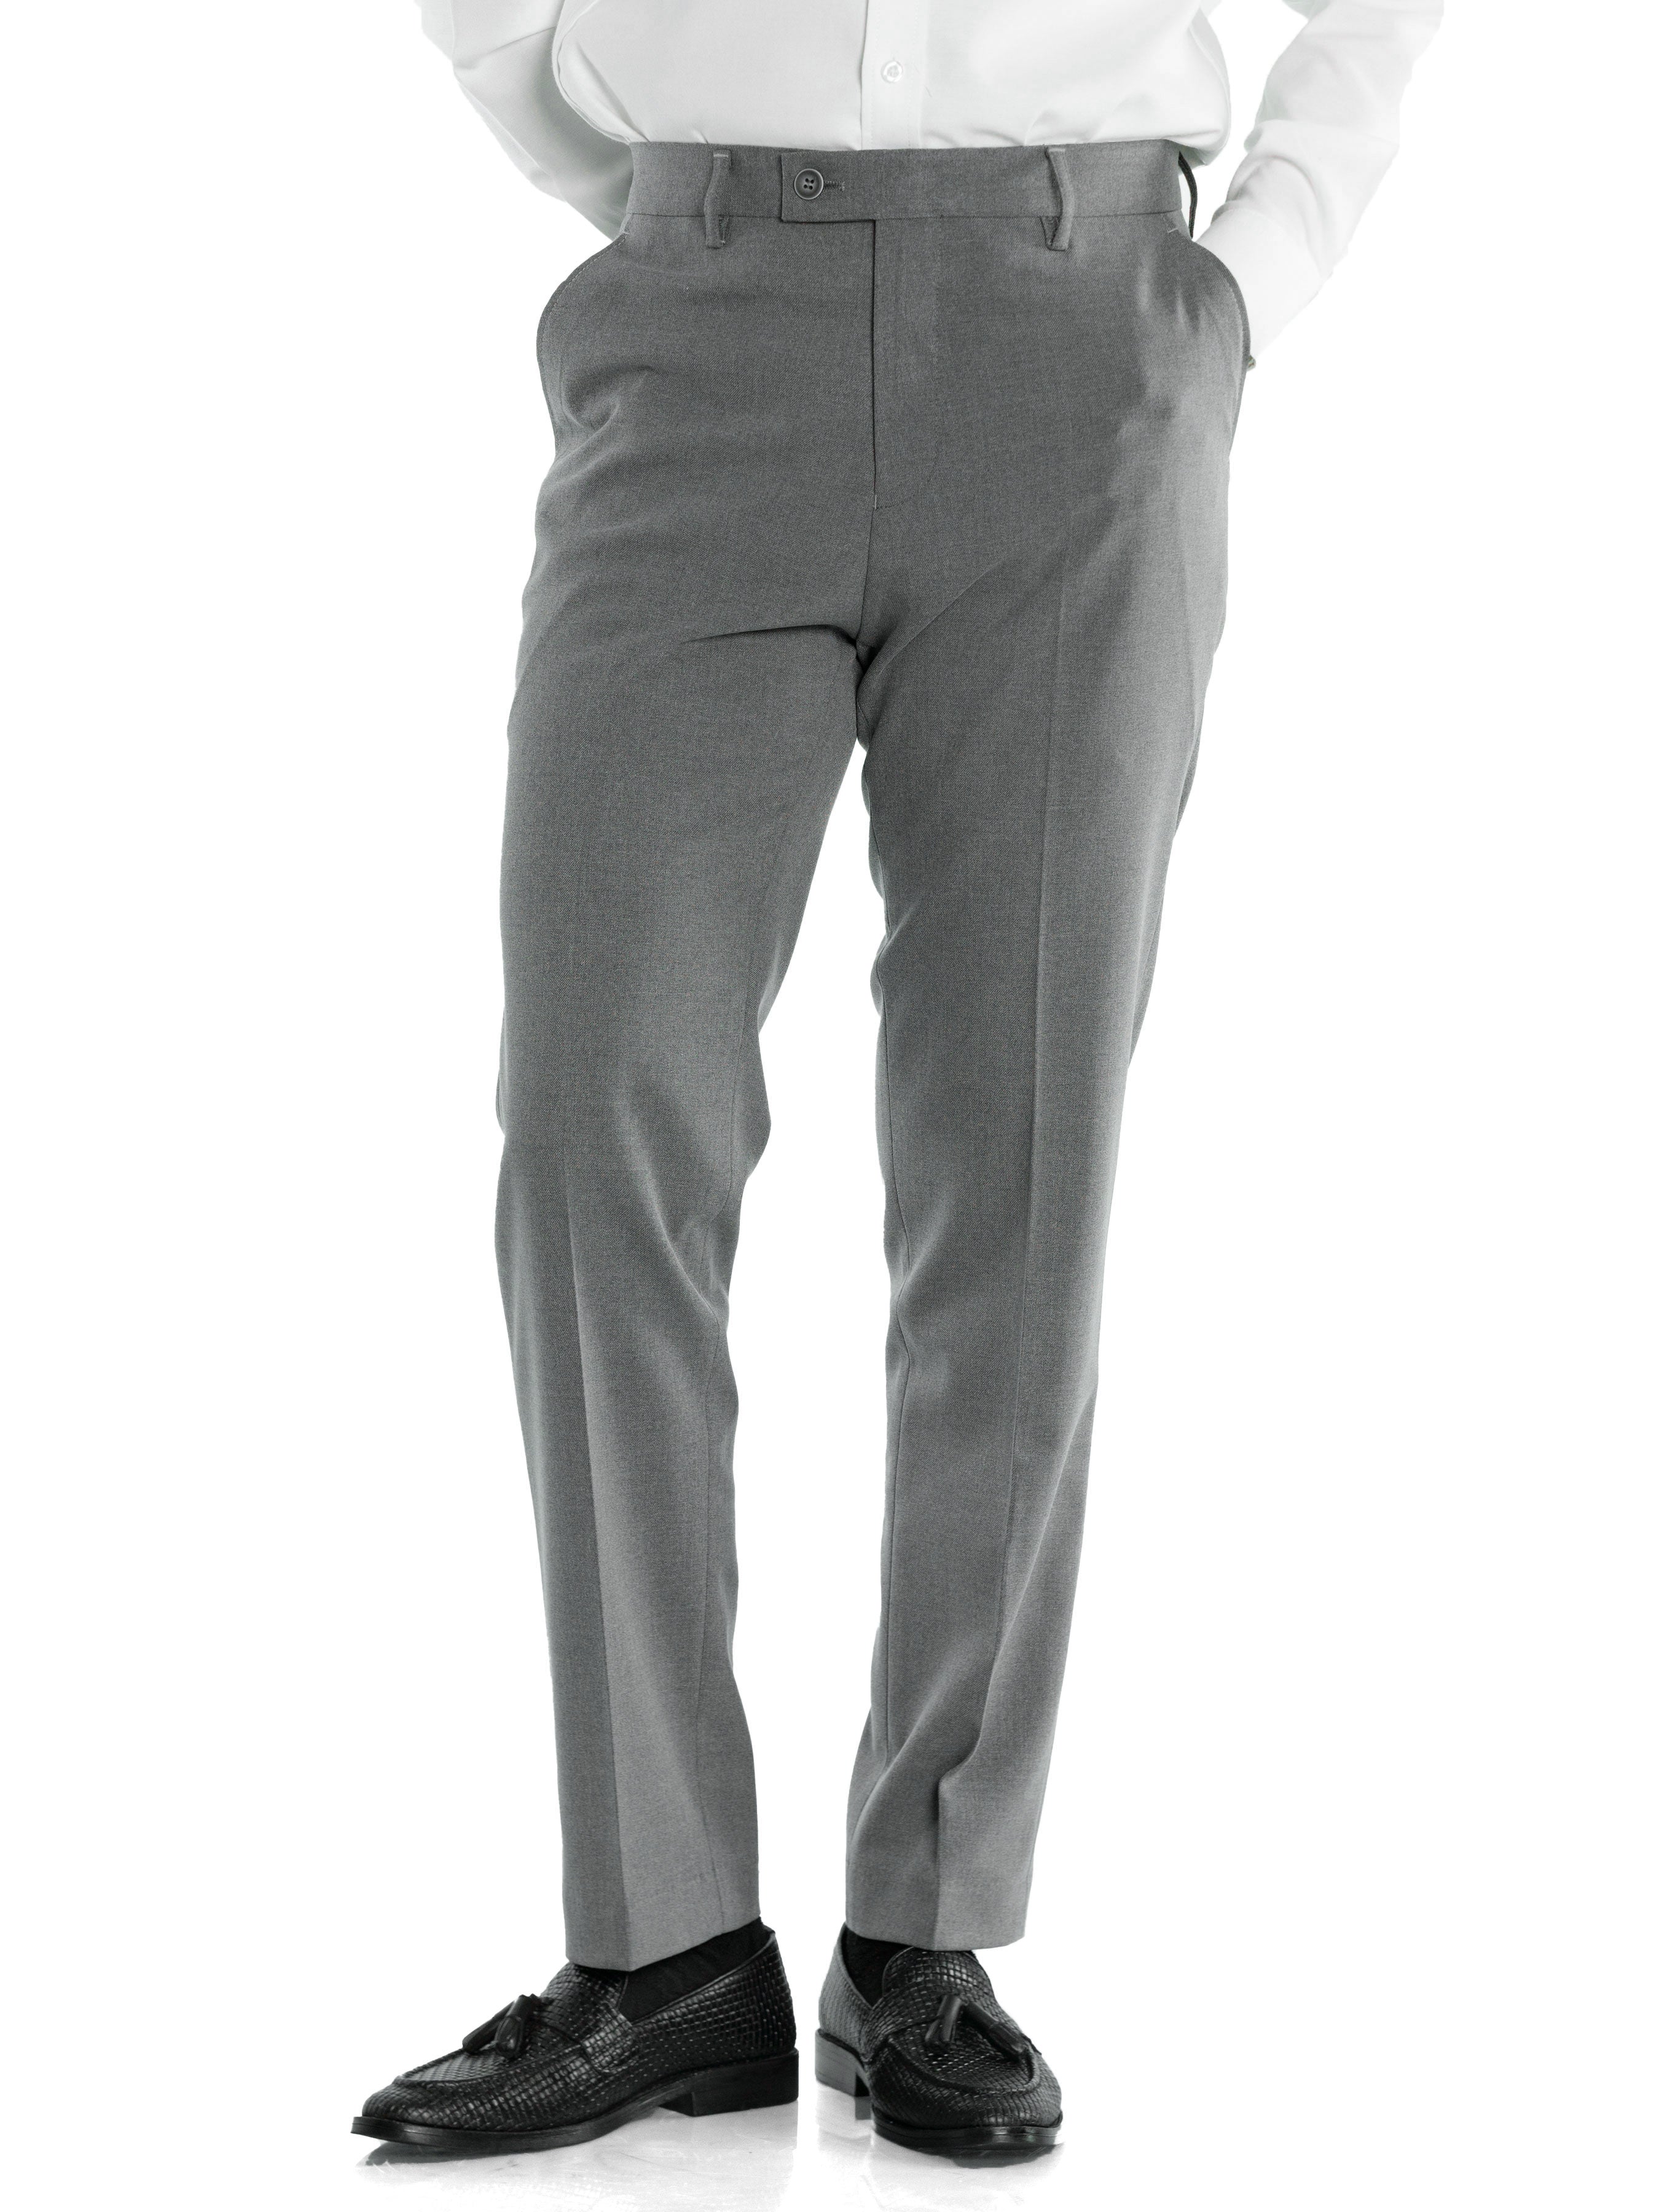 Trousers With Belt Loop - Grey Plain (Stretchable)